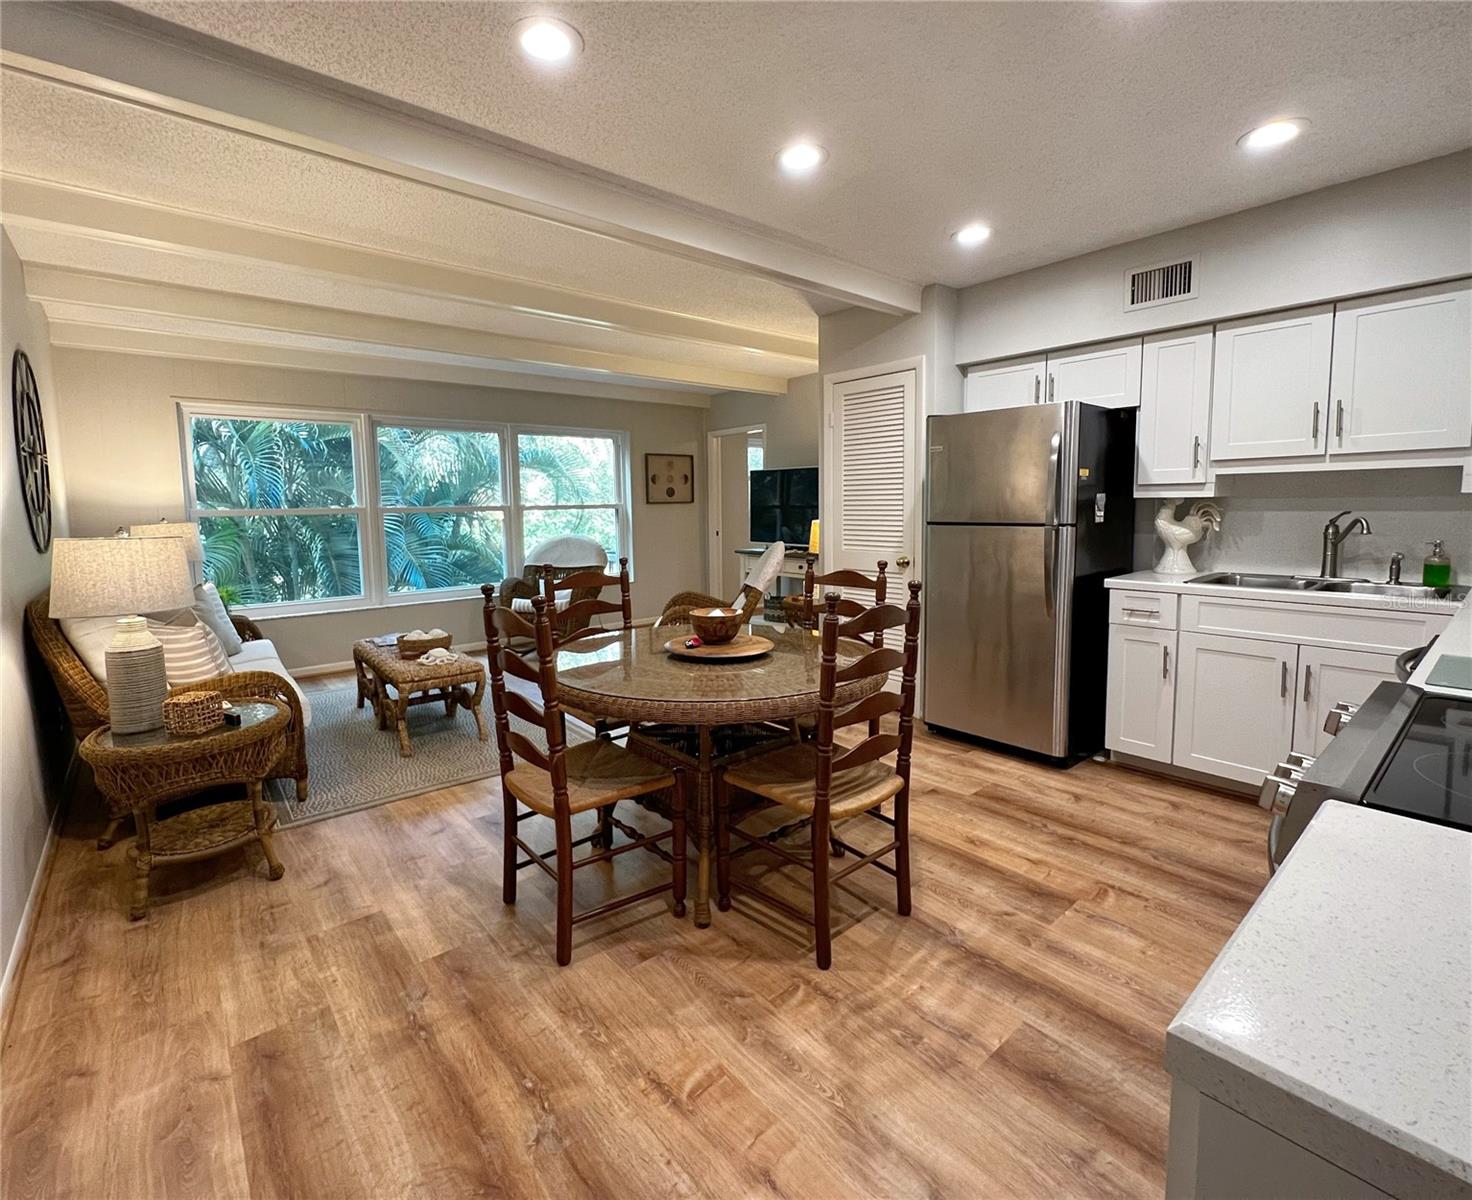 Newly renovated kitchen with eat in space, and open to the family room.